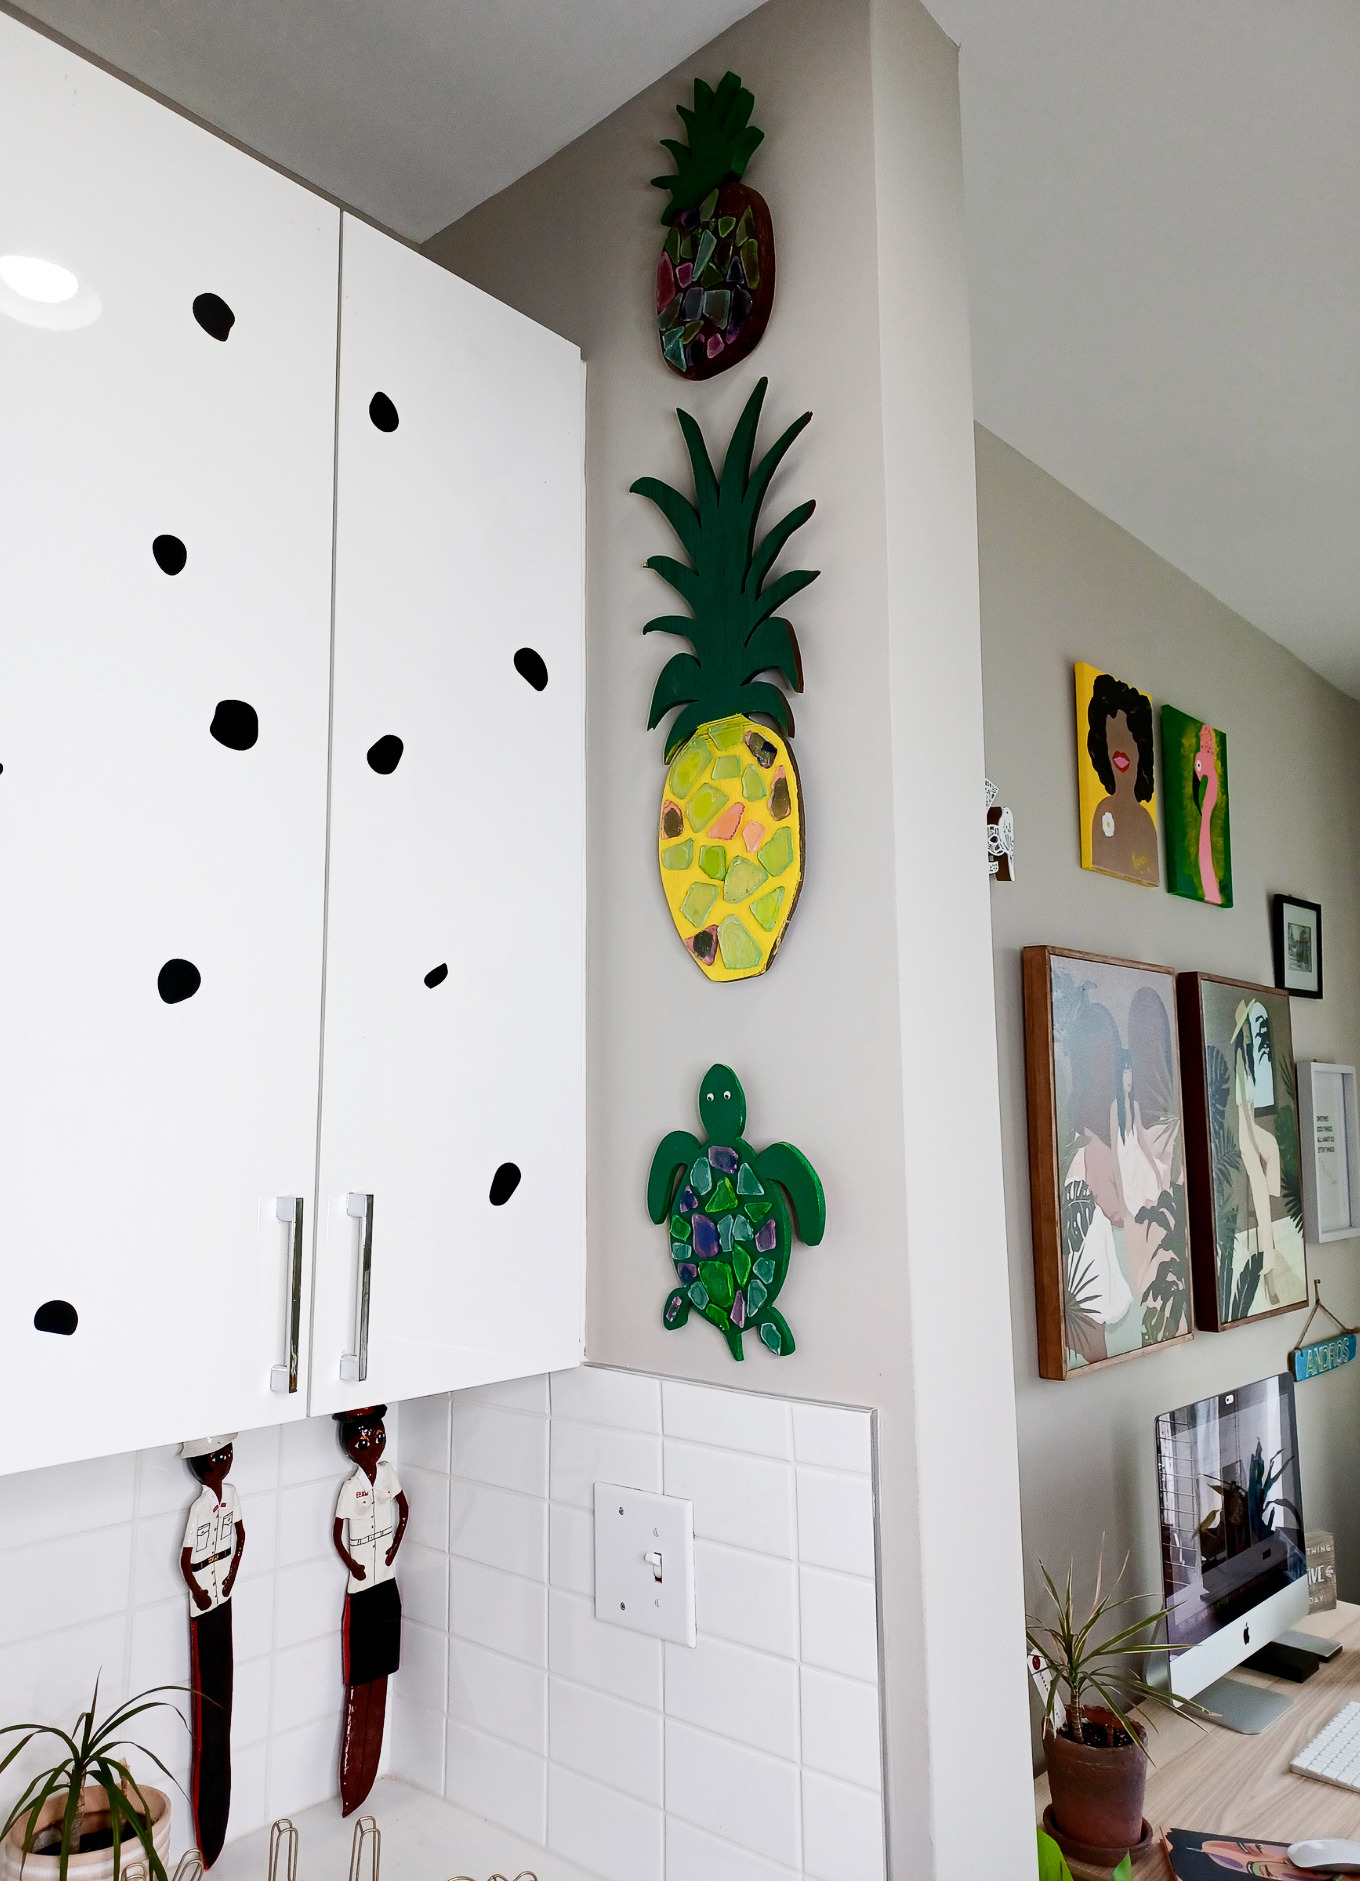 Island decor on the wall of this studio apartment